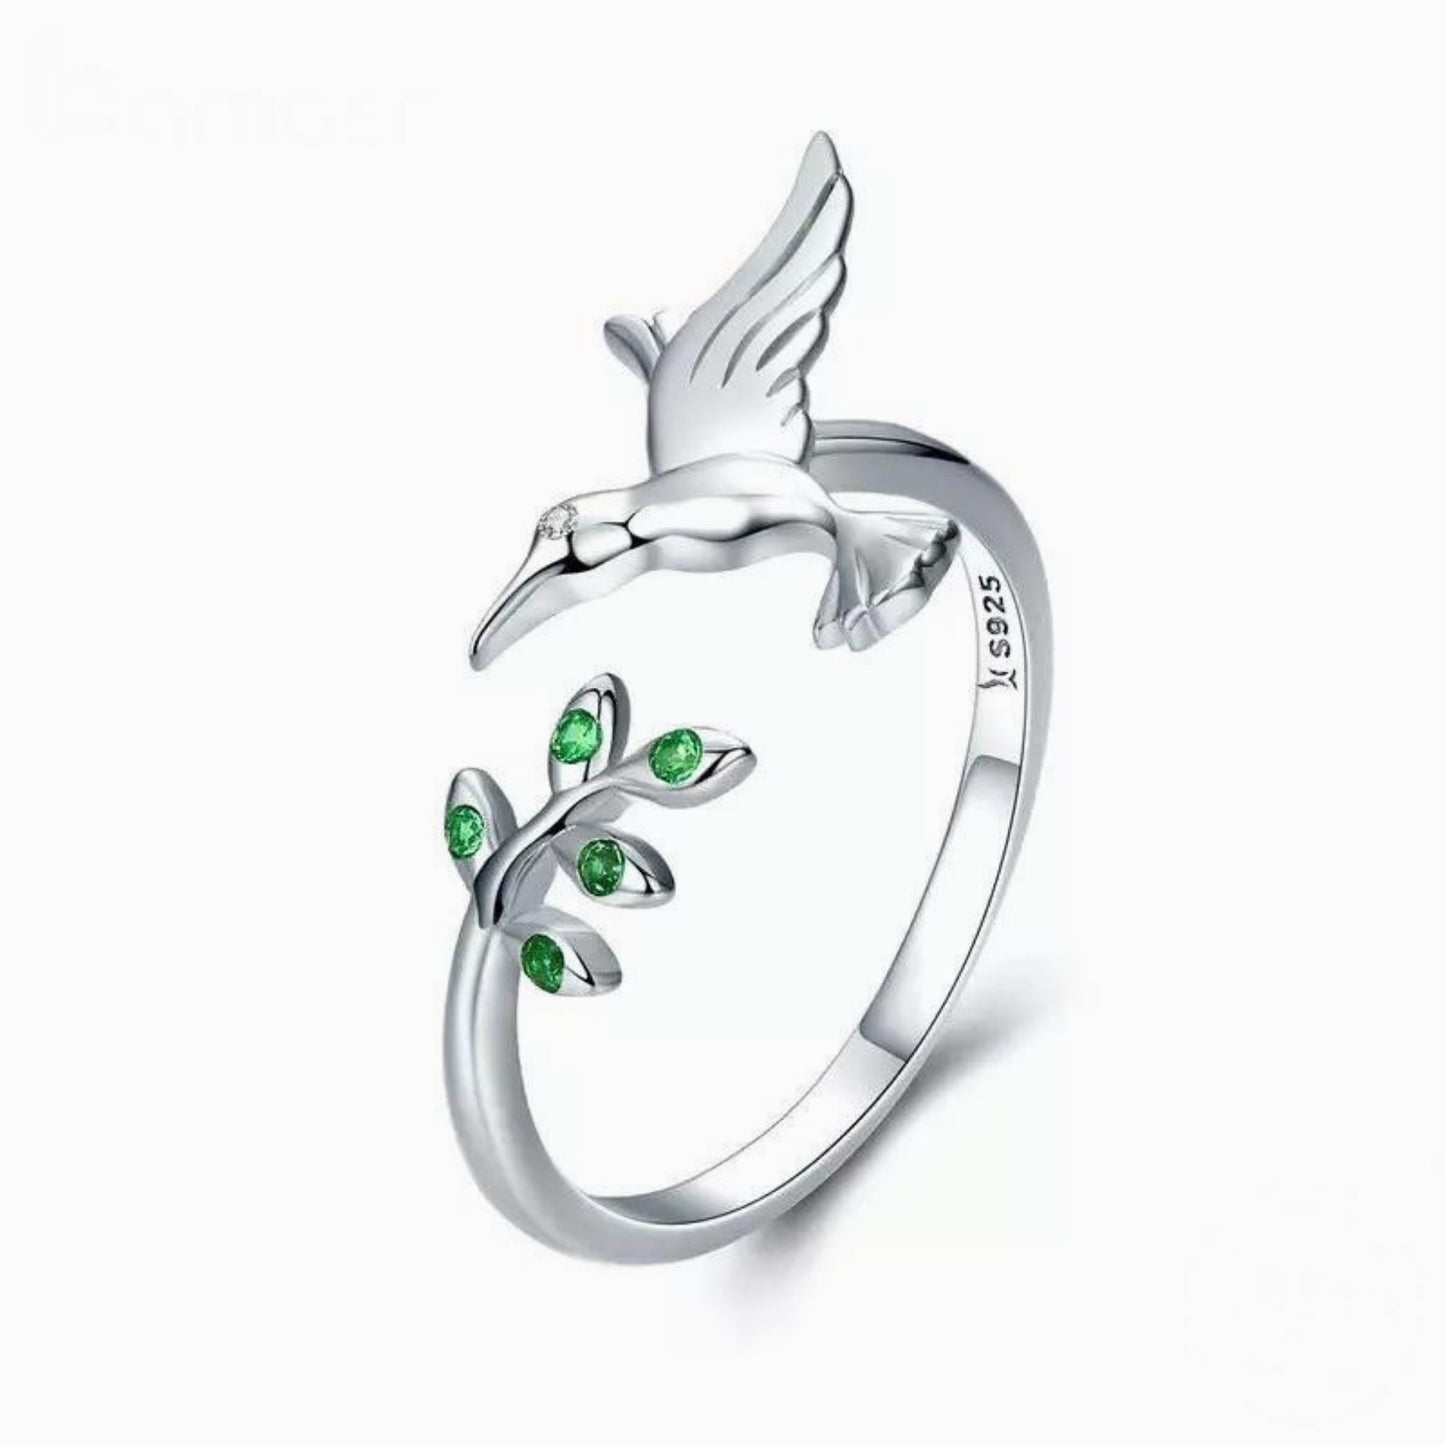 Sterling Silver Ring - Hummingbird - The Little Jewellery Company